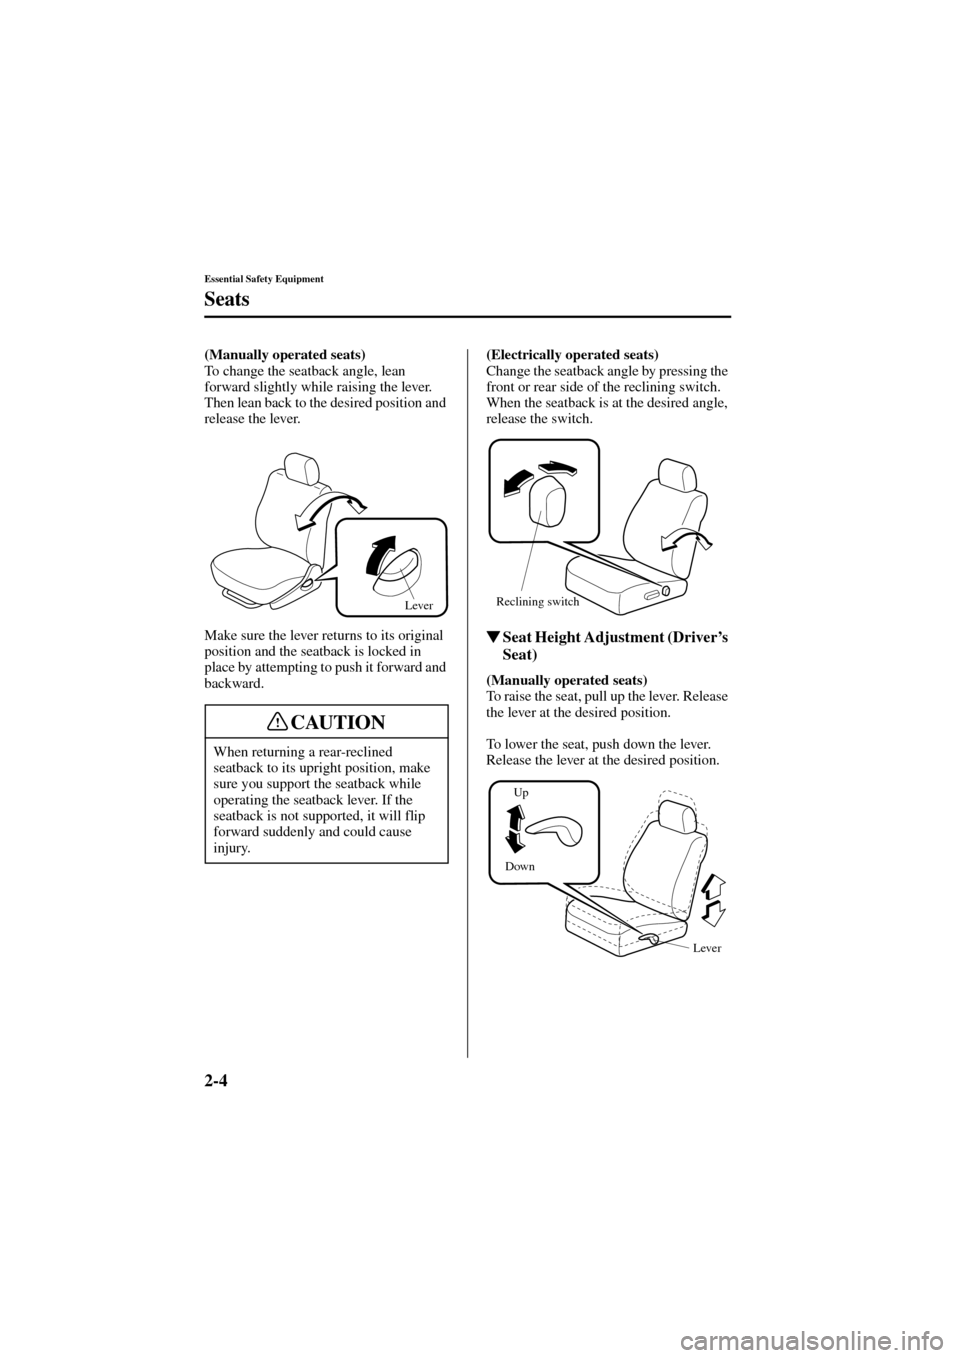 MAZDA MODEL 6 2004   (in English) Owners Manual 2-4
Essential Safety Equipment
Seats
Form No. 8R29-EA-02I
(Manually operated seats)
 
To change the seatback angle, lean 
forward slightly while raising the lever. 
Then lean back to the desired posit